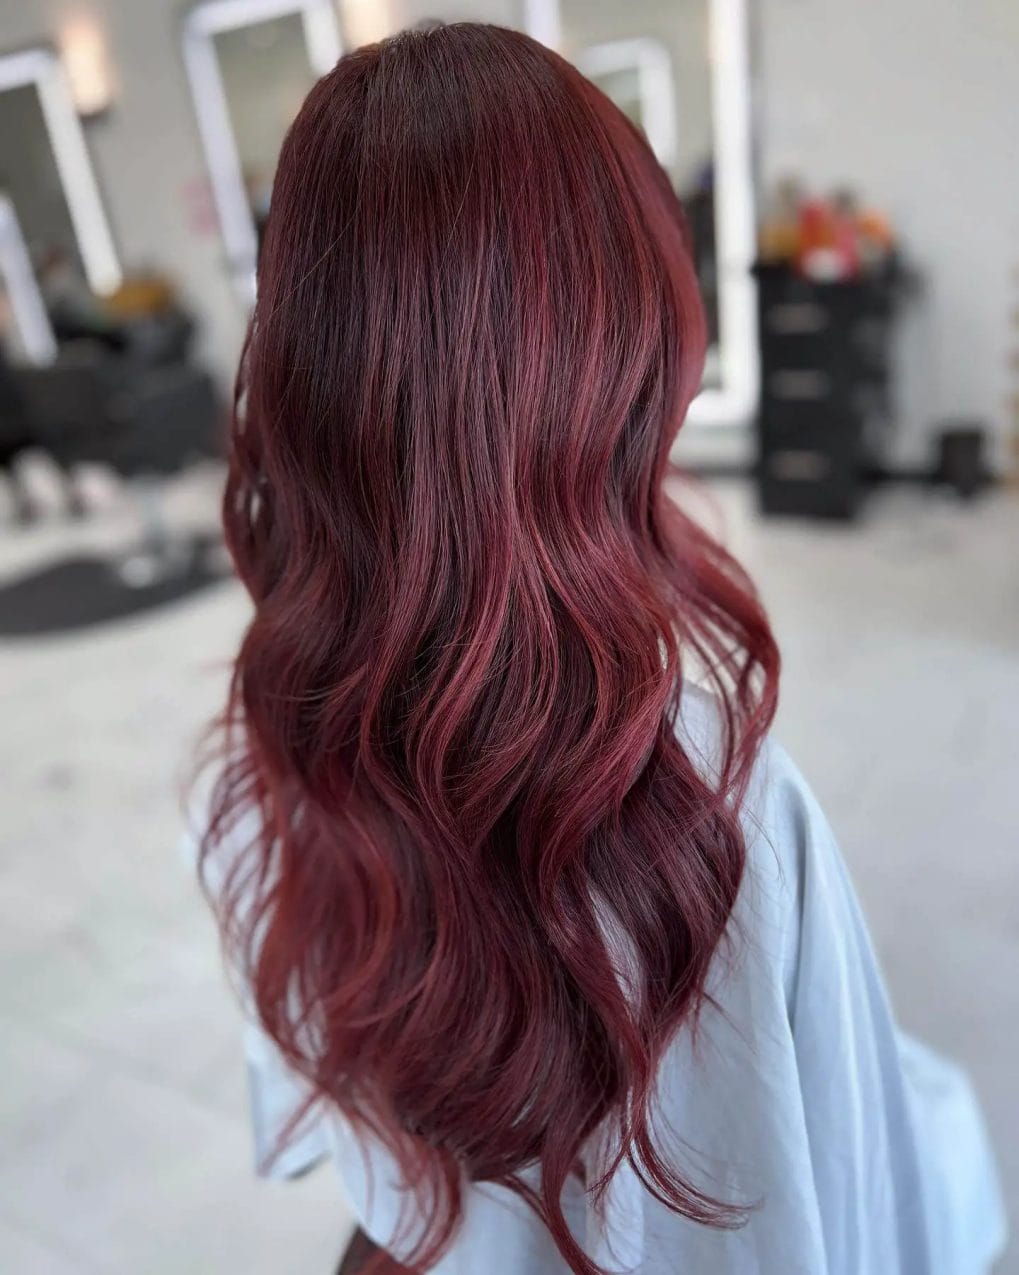 Burgundy to dark brunette roots in seamless red balayage.